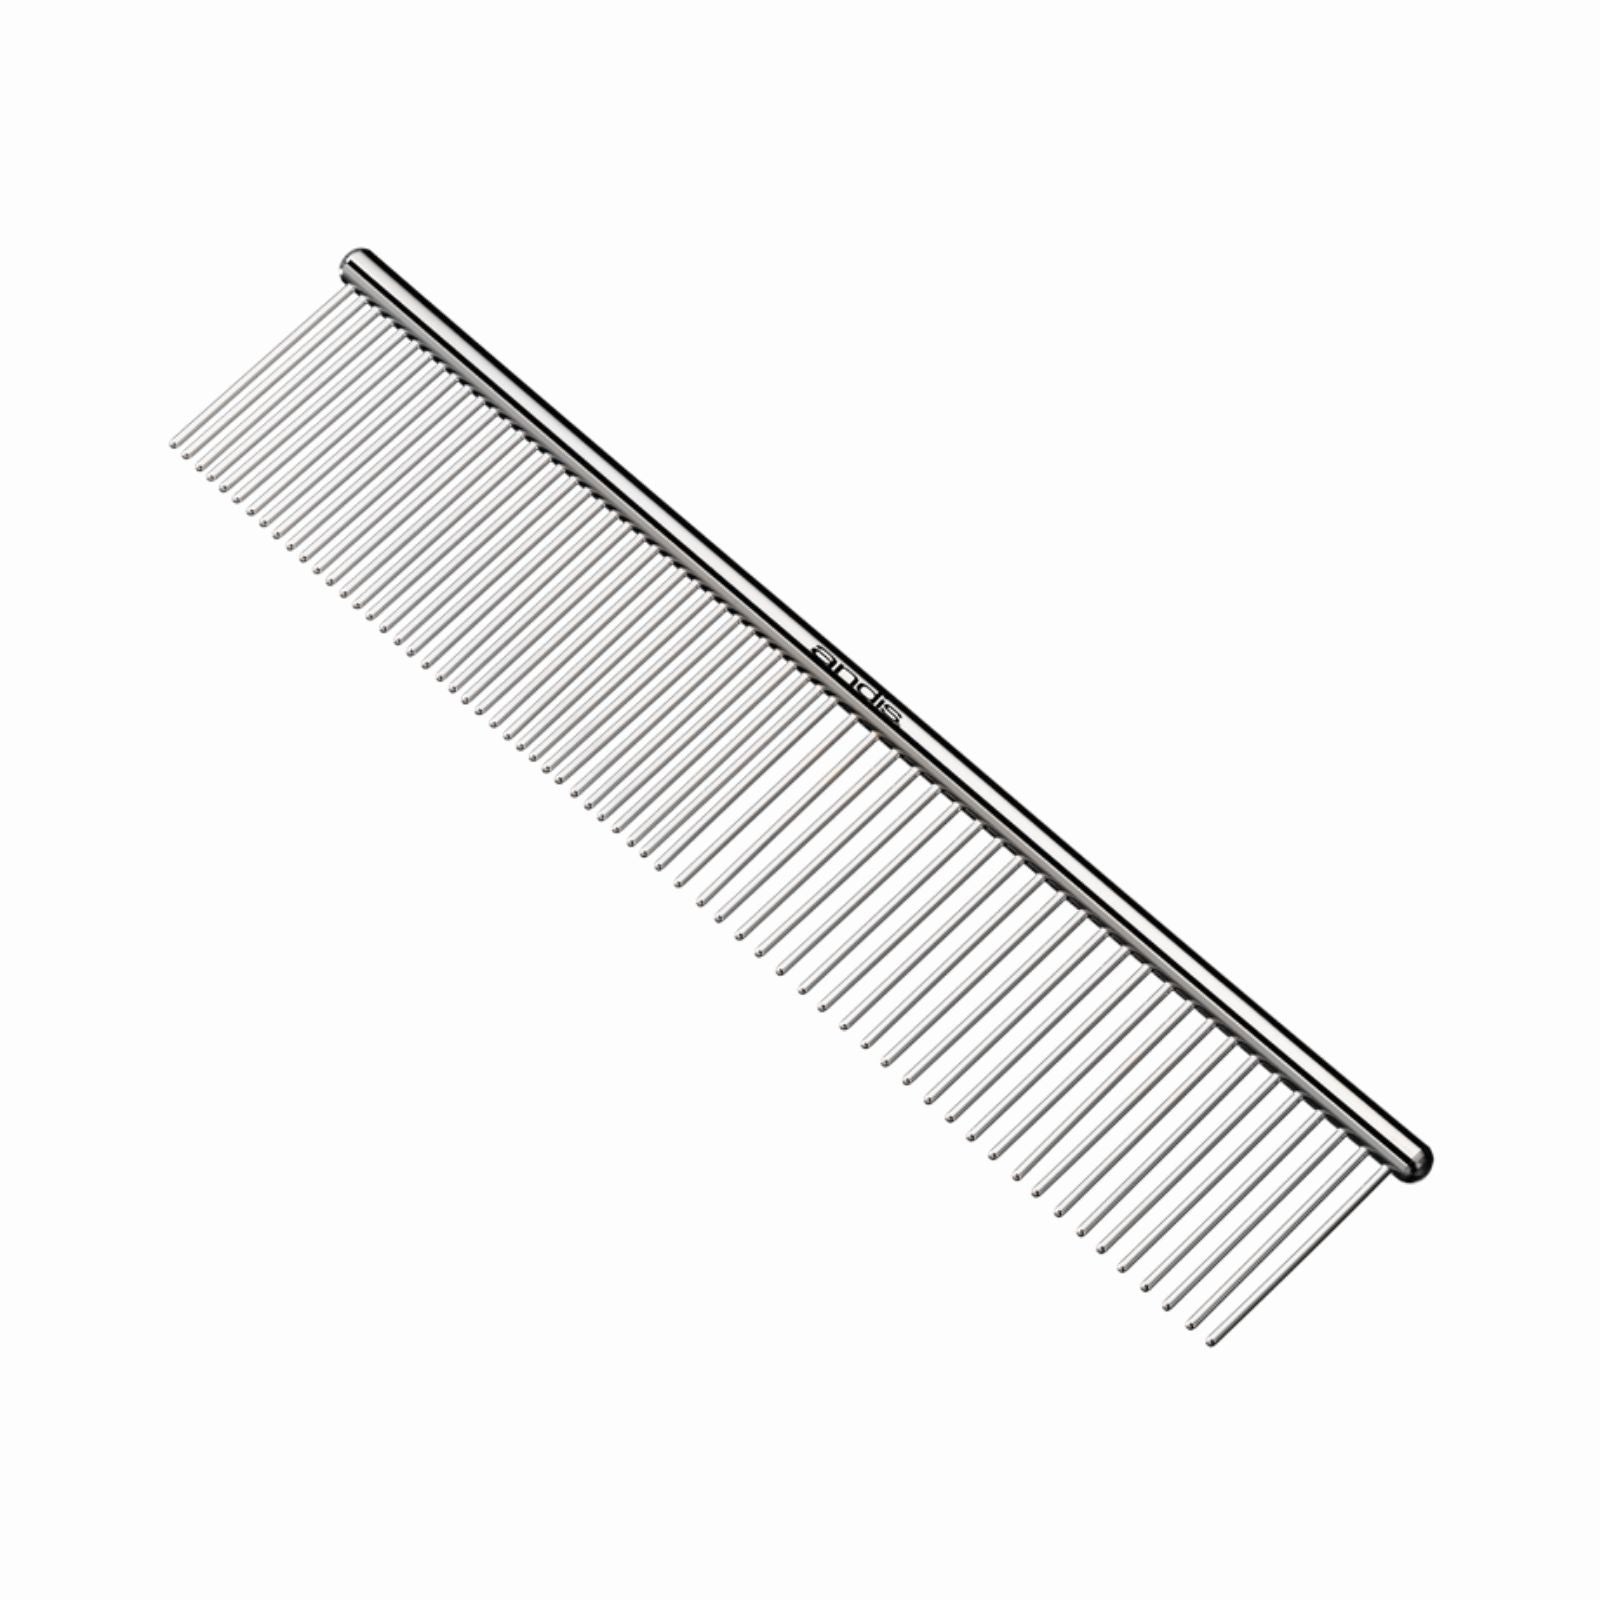 Pet grooming comb with coarse and fine teeth